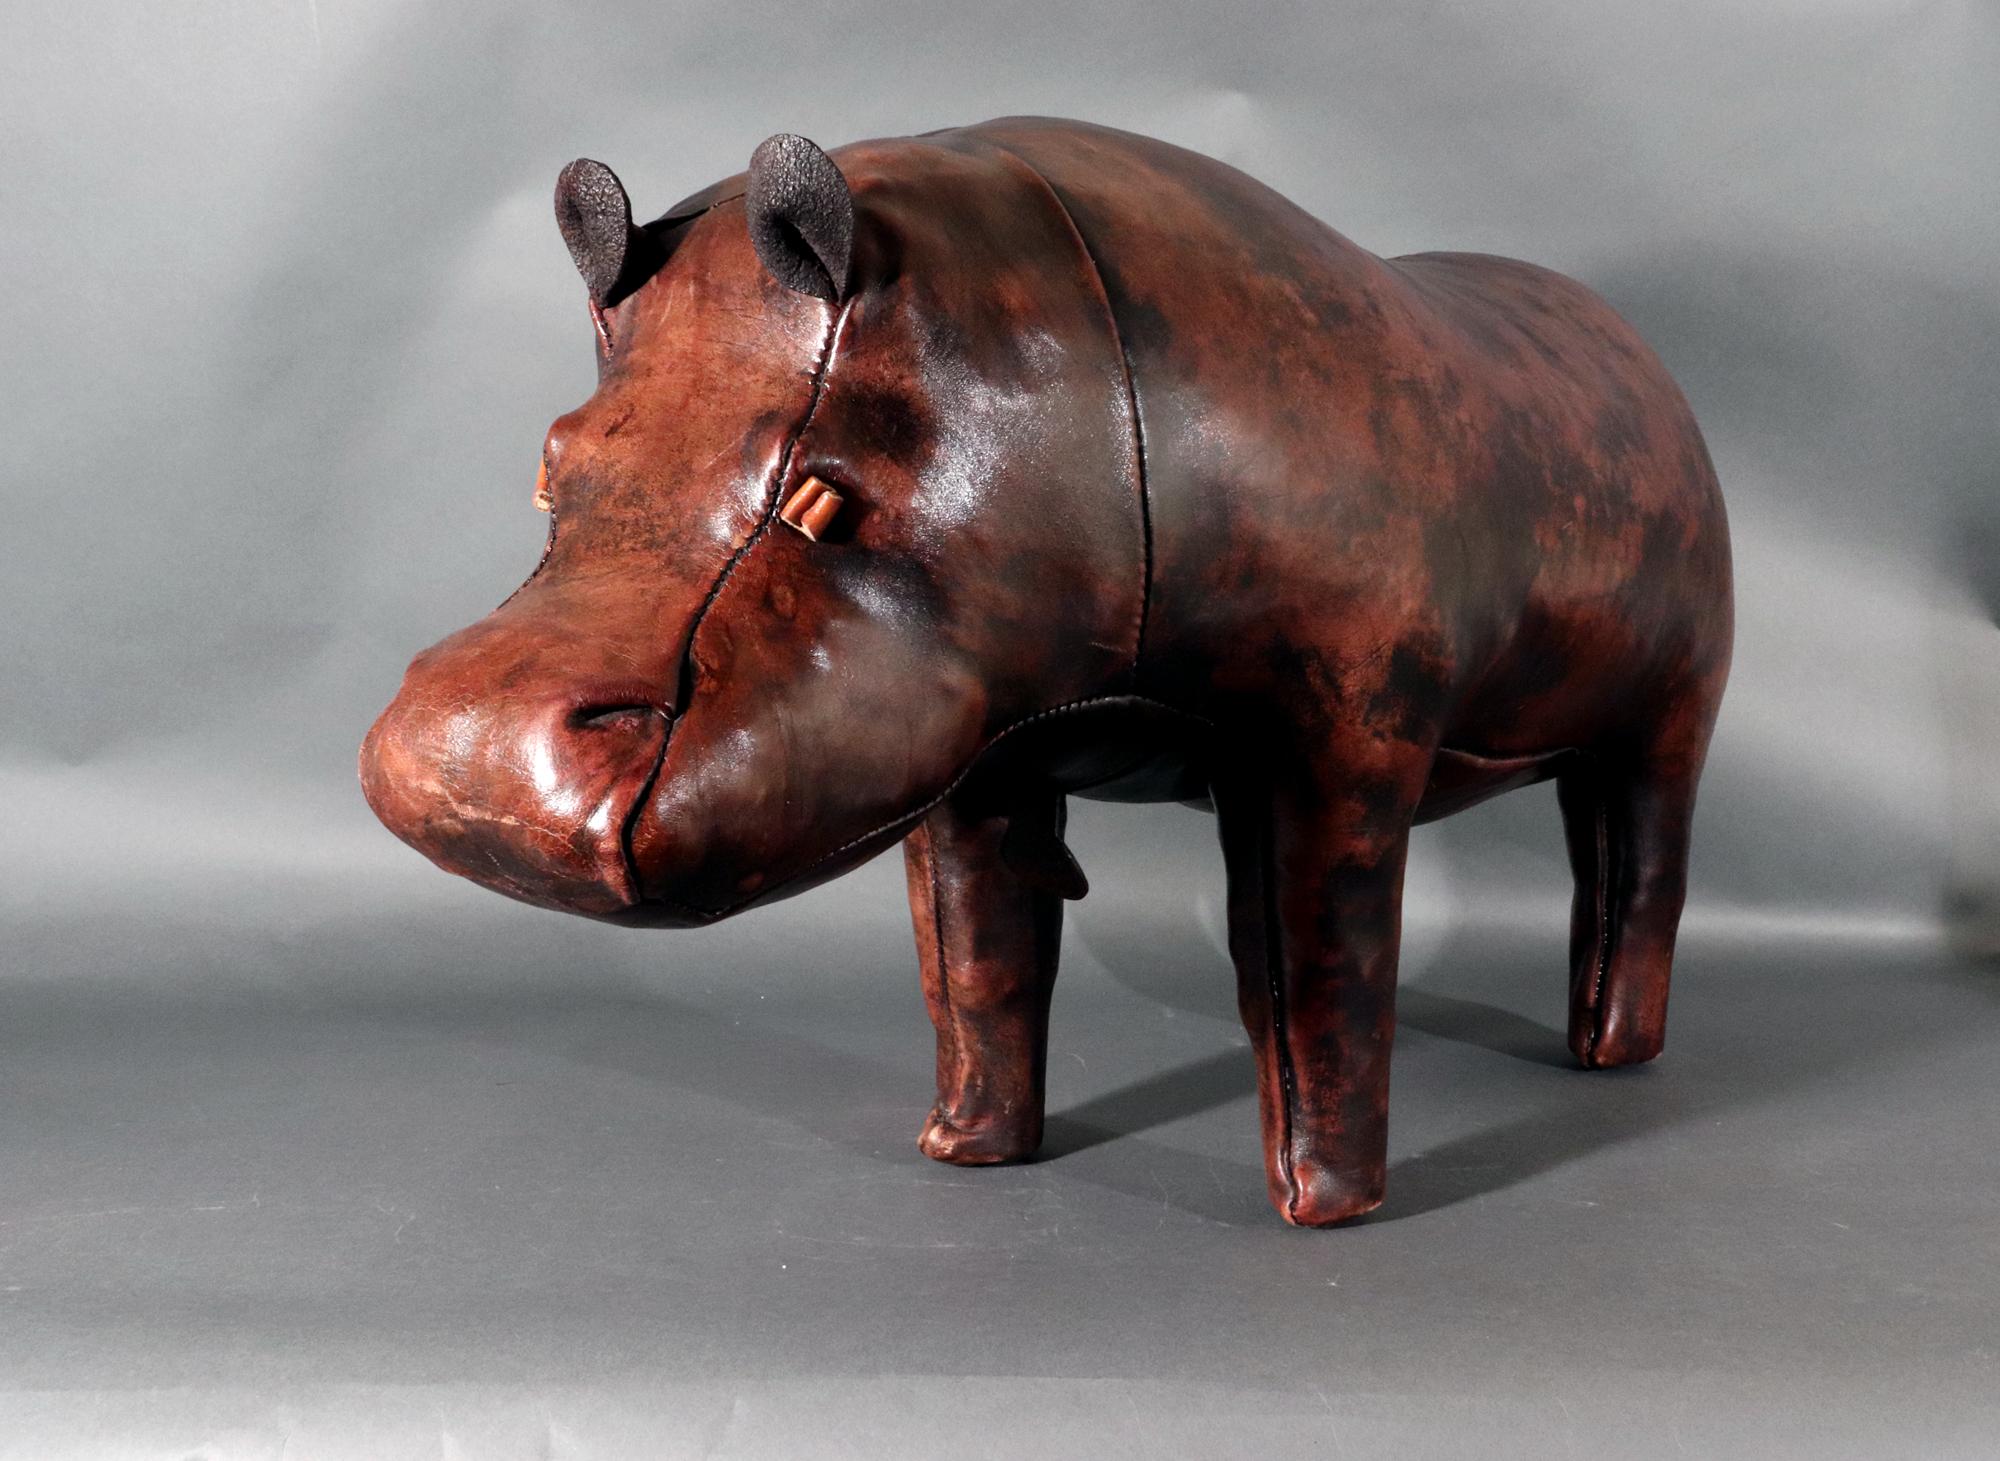 Vintage Leather Hippopotamus Stool,
After Dimitri Omersa,
Jancraft,
1960s-70s

The leather footstool or ottoman is designed in the shape of a hippo in a beautiful leather.    The hippo is so expressive with eyes and small ears and tail.  The